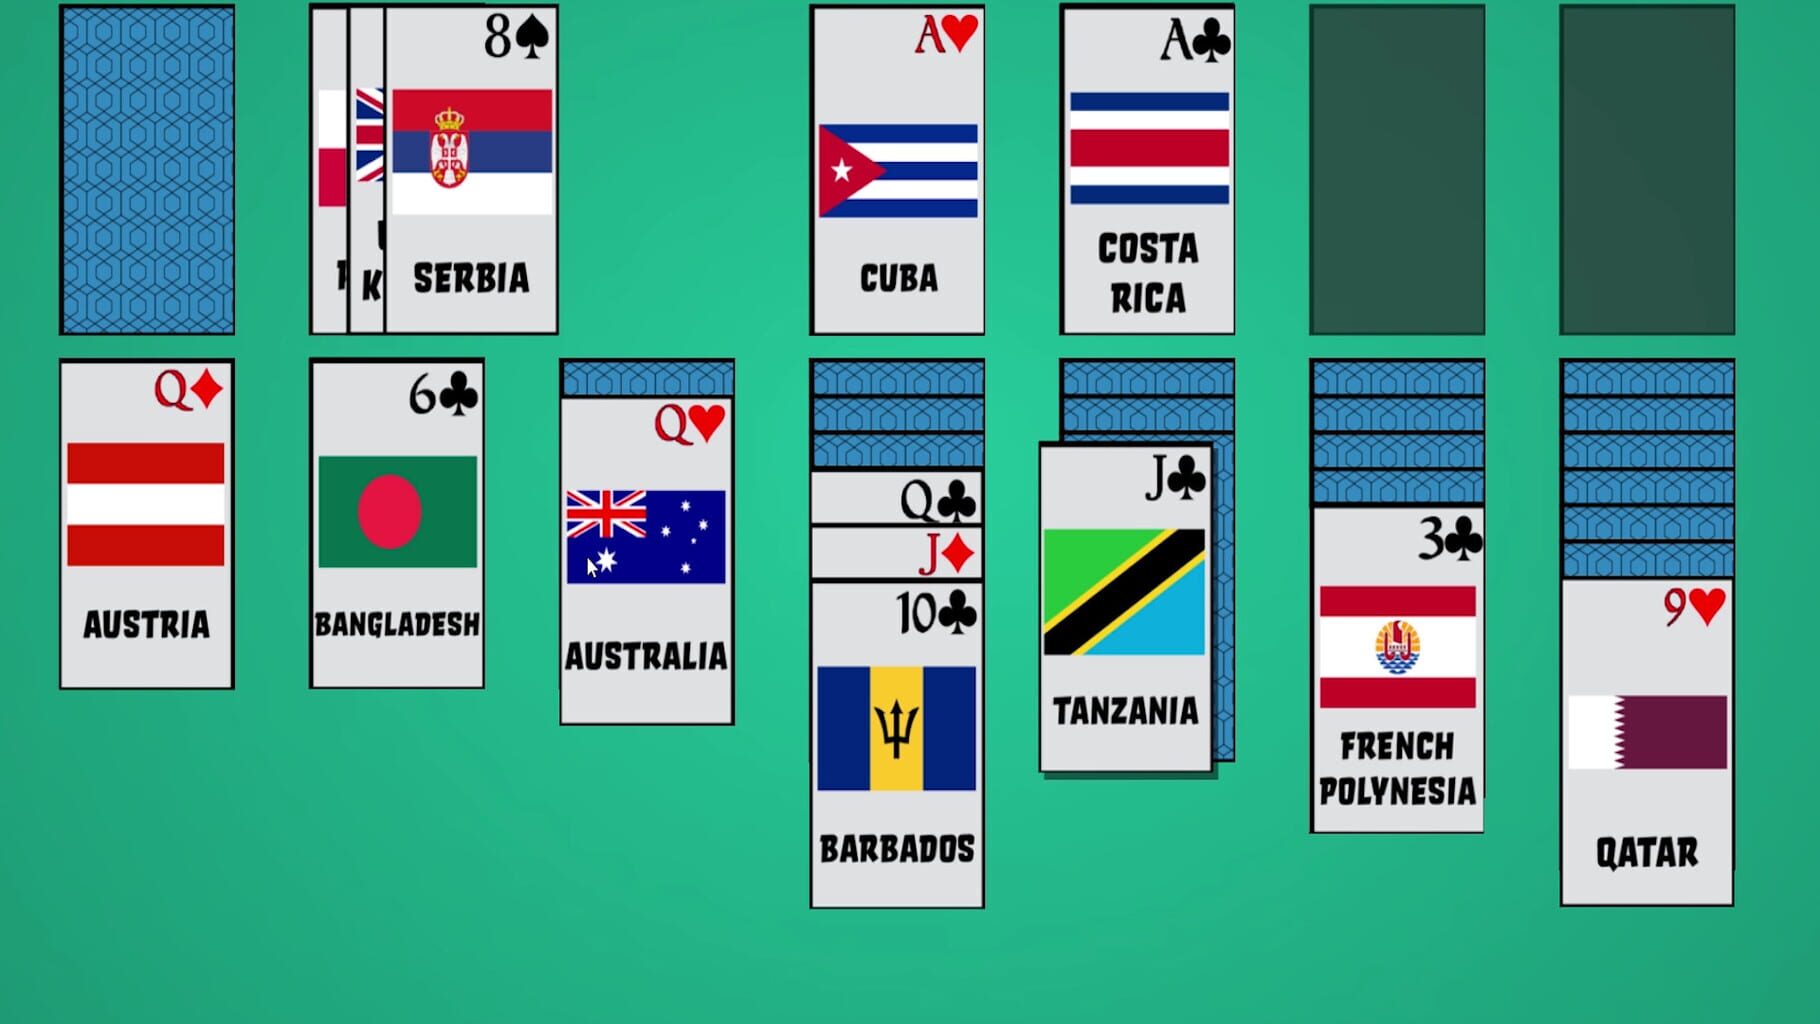 Solitaire: Learn the Flags! Image